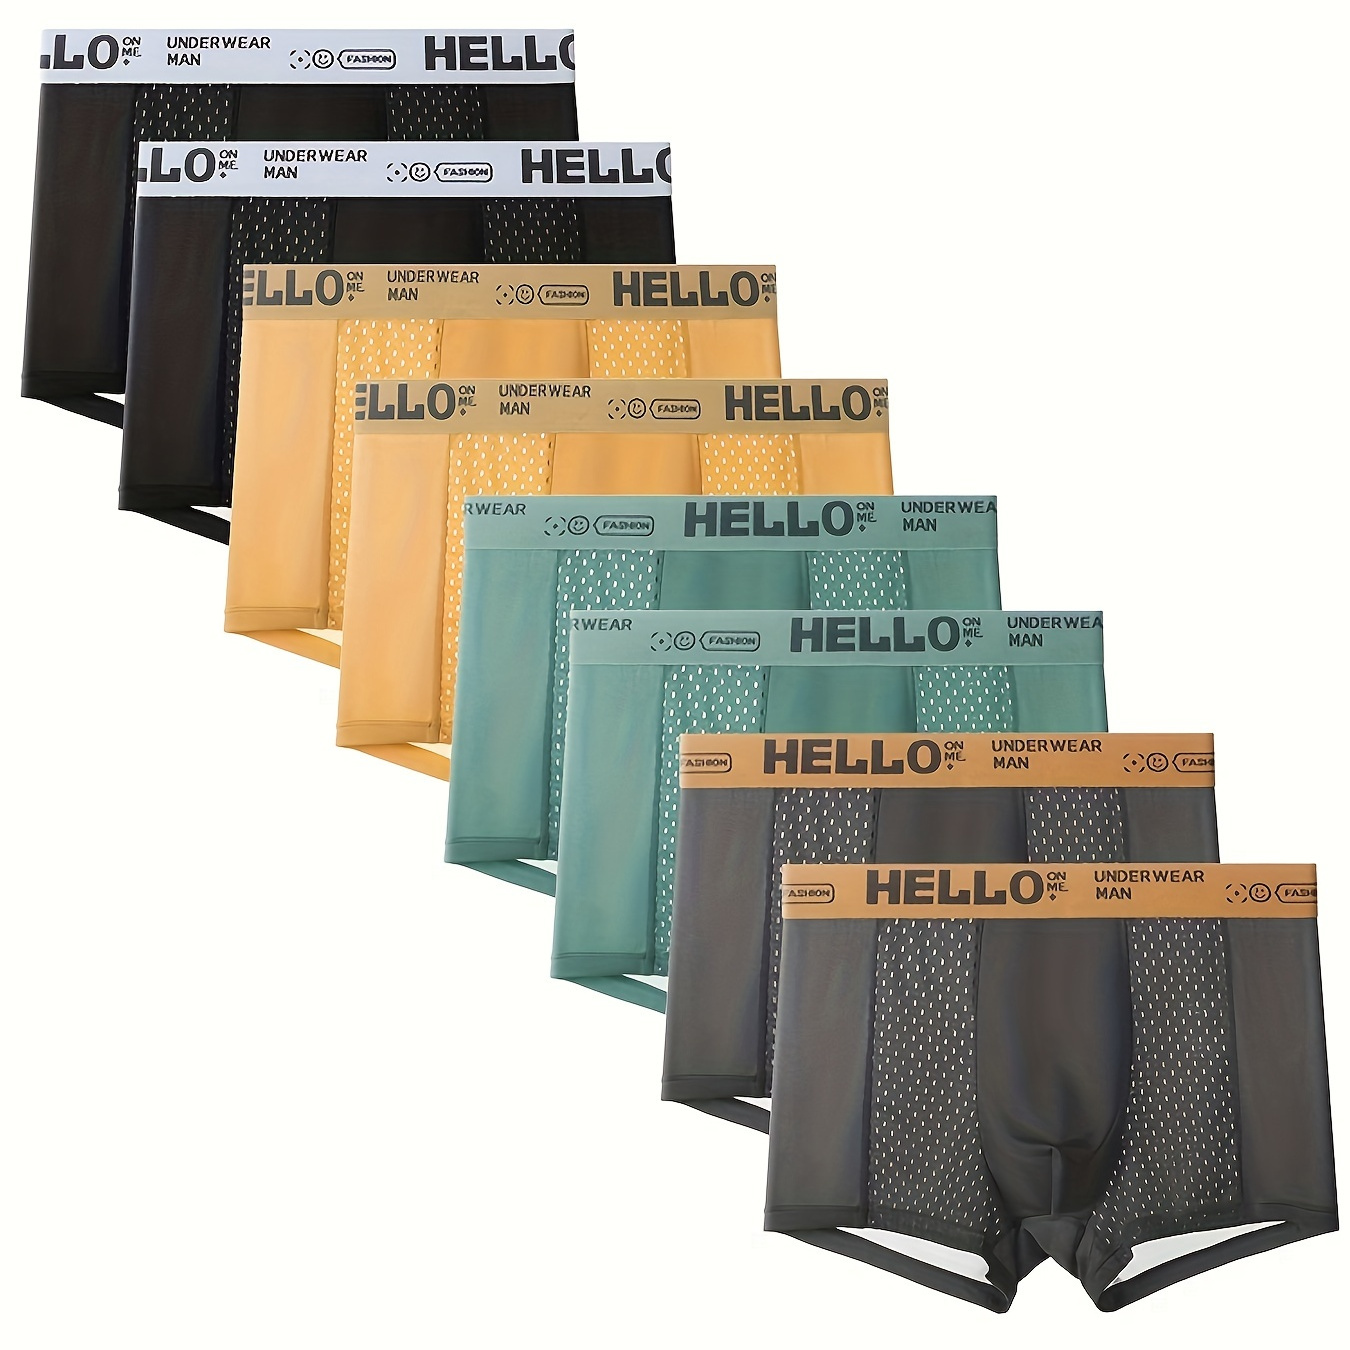 

8pcs Men's Summer Mesh Ice Silk Boxer Briefs, Hello Breathable Comfy Stretchy Boxer Trunks, Sports Shorts, Men's Casual Underwear